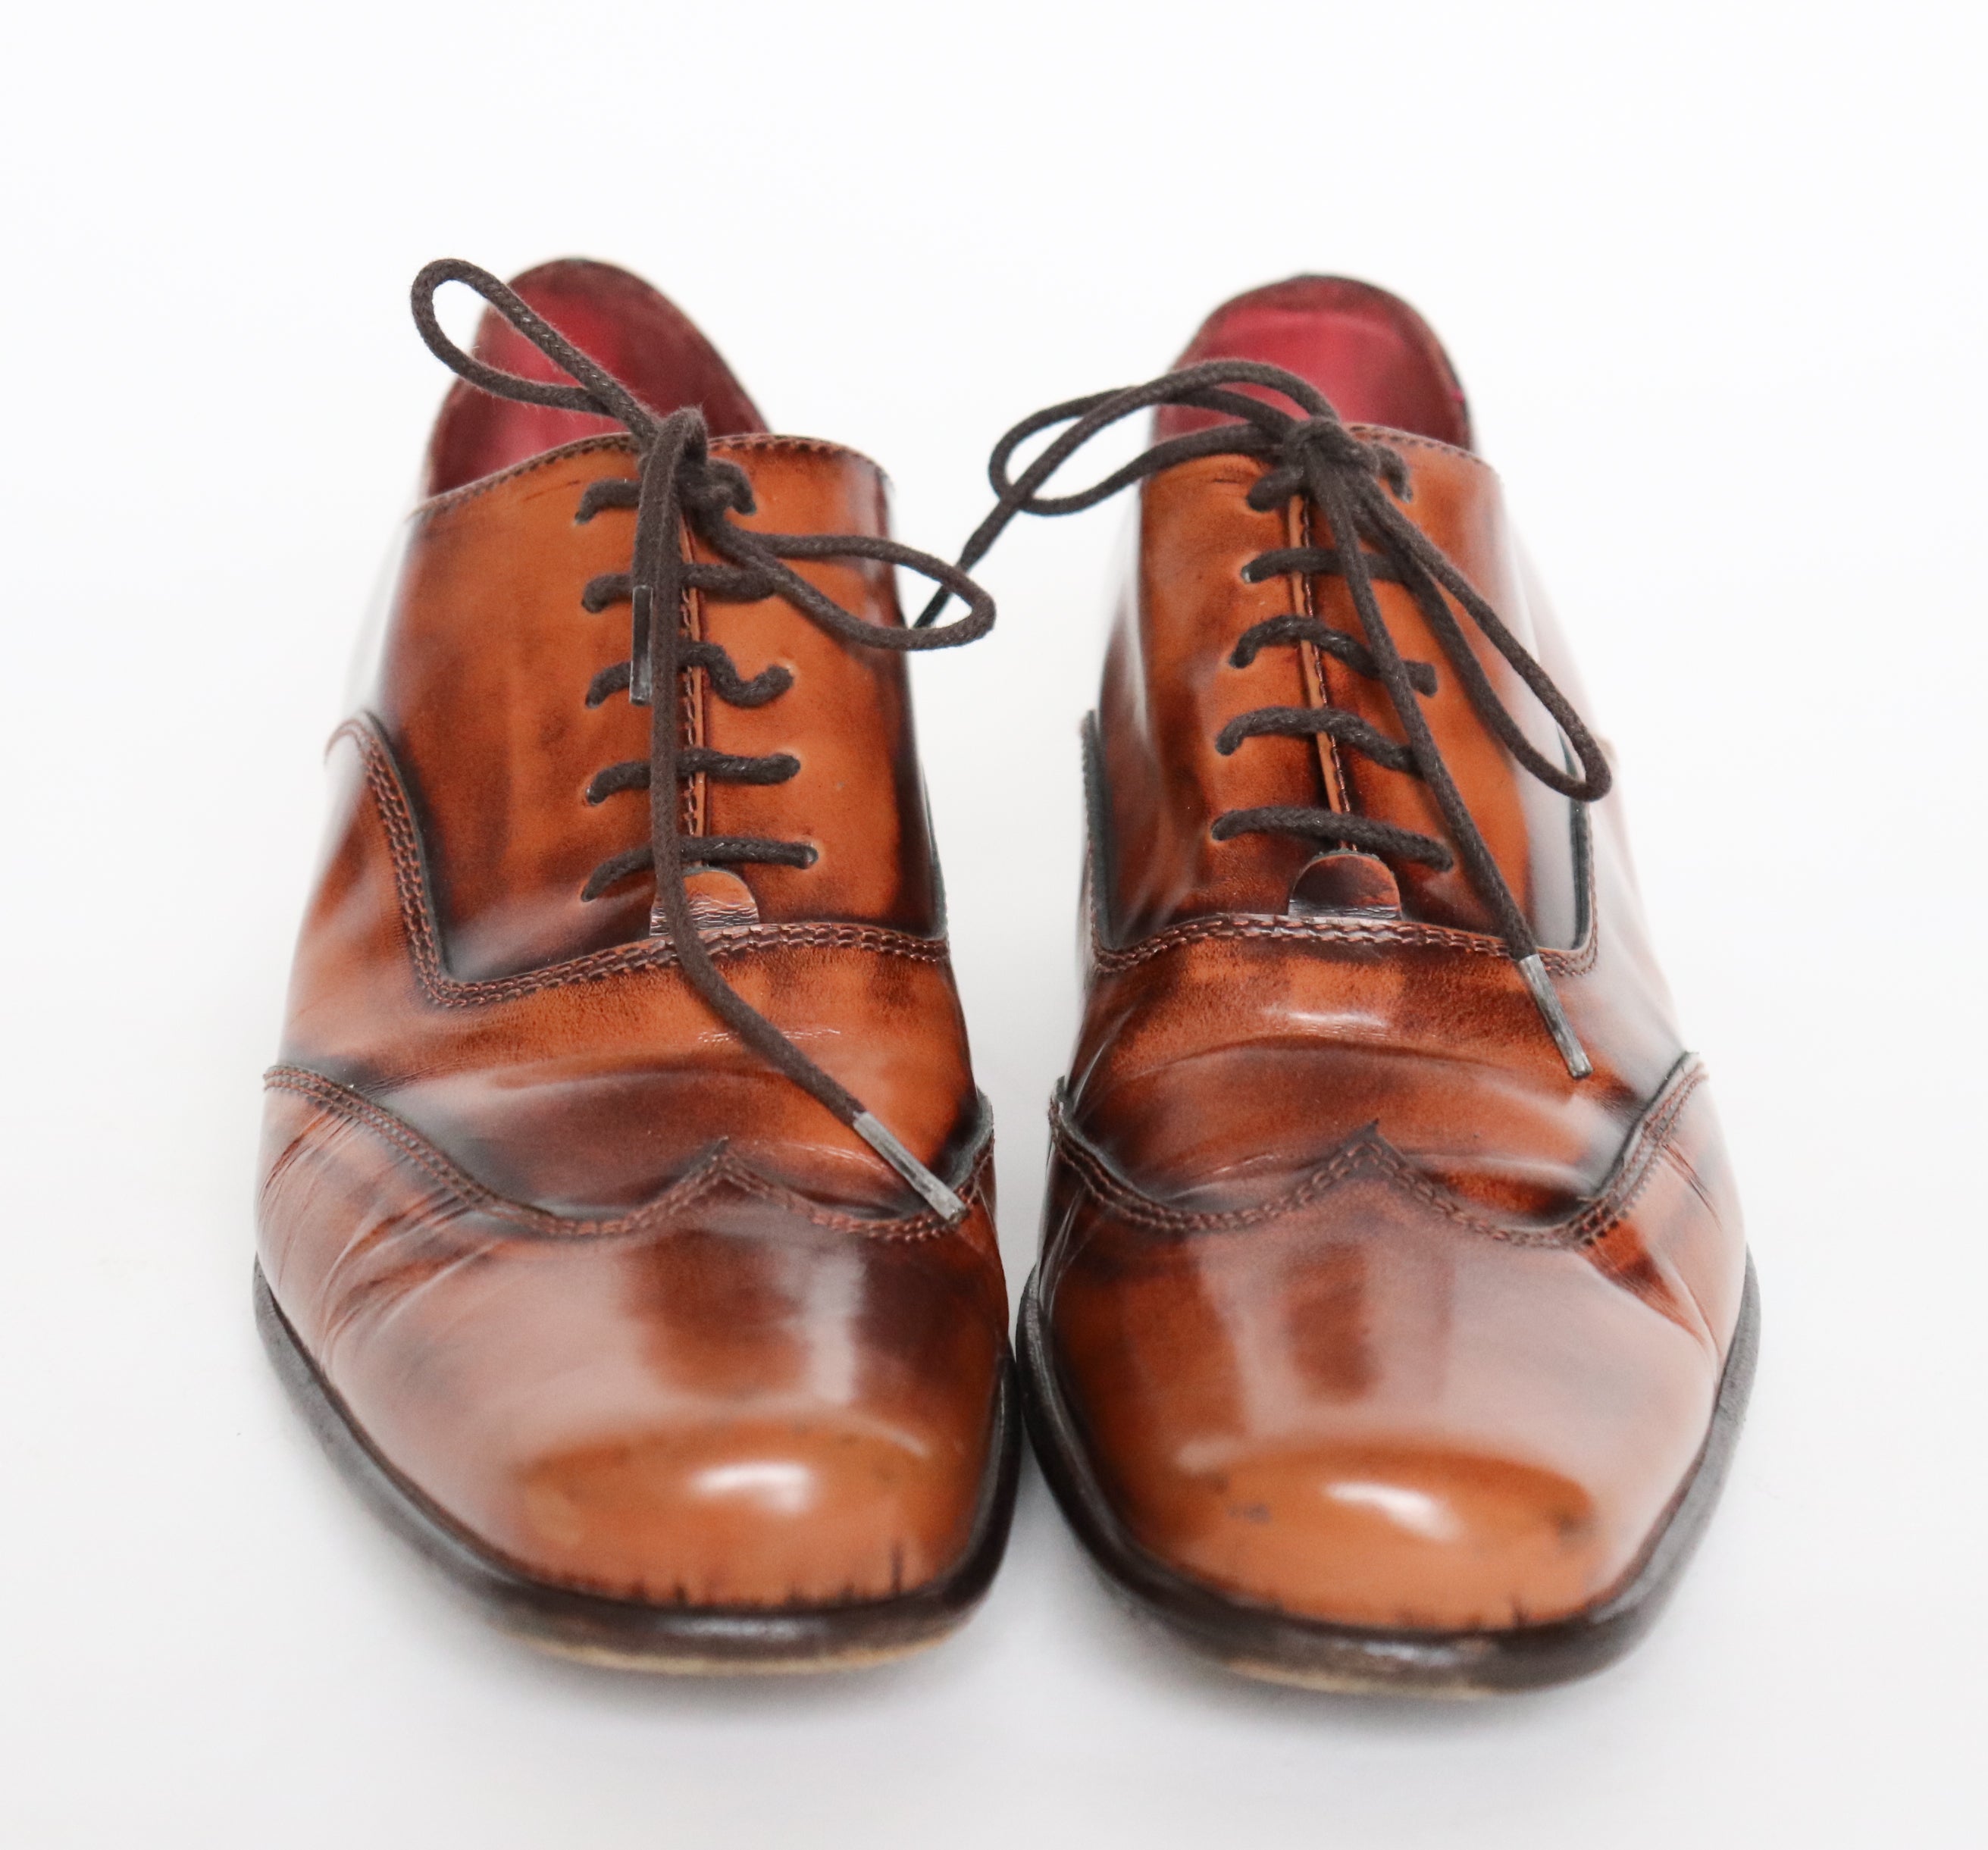 Brown Leather Brogue / Lace-Up Shoes - IXOS - Squared Toes - NARROW 39 / UK 6